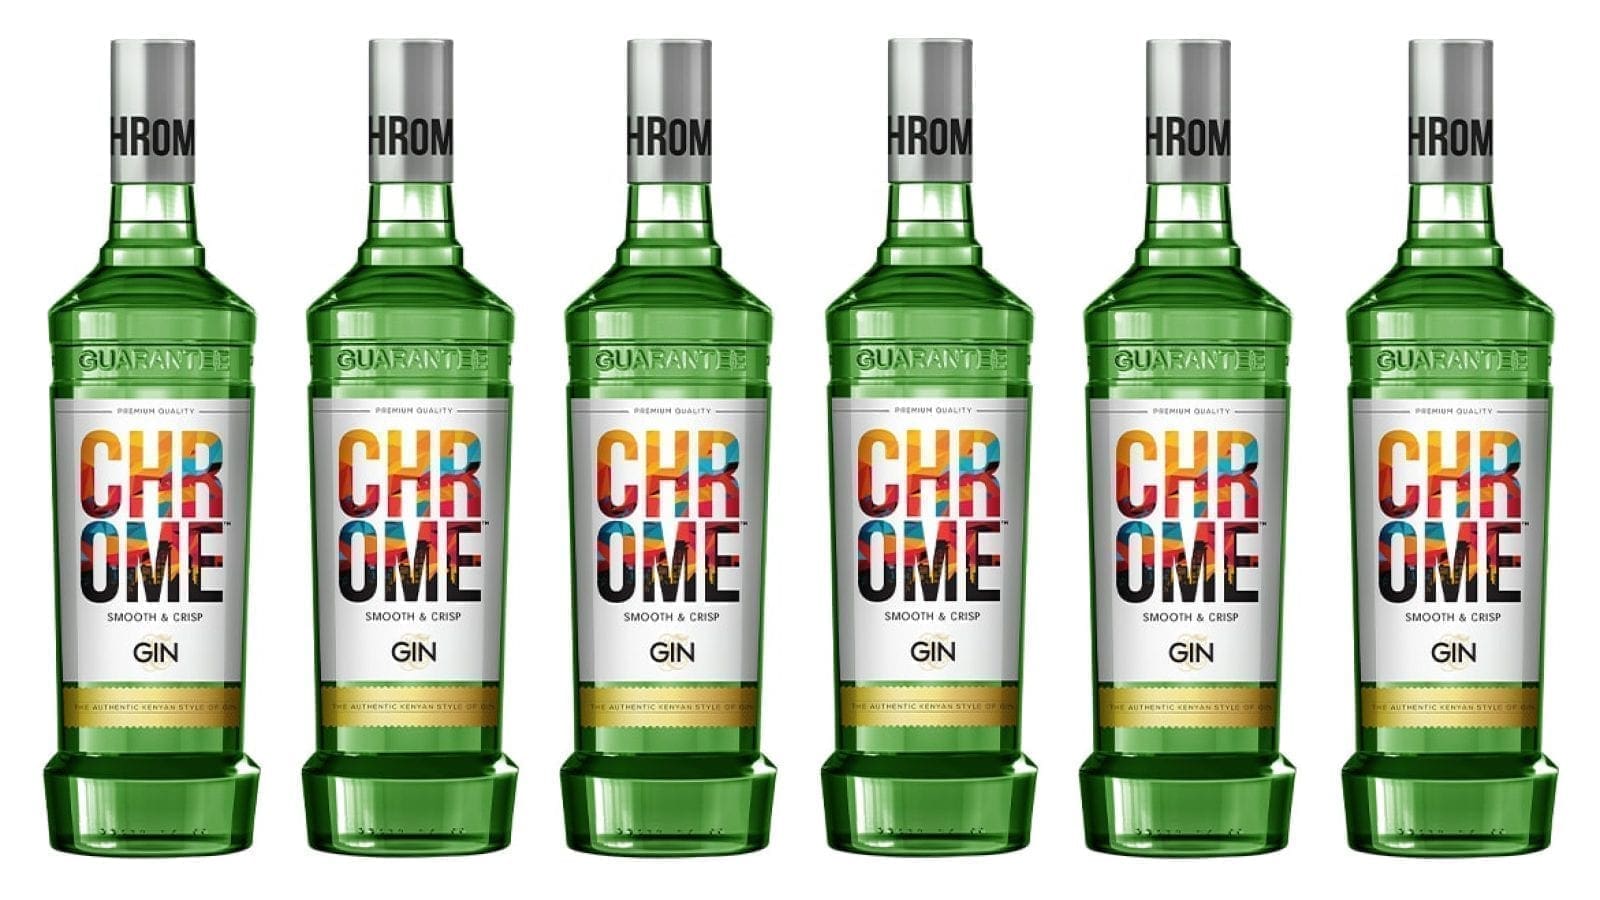 Kenya Breweries Limited debuts gin variation of its Chrome brand